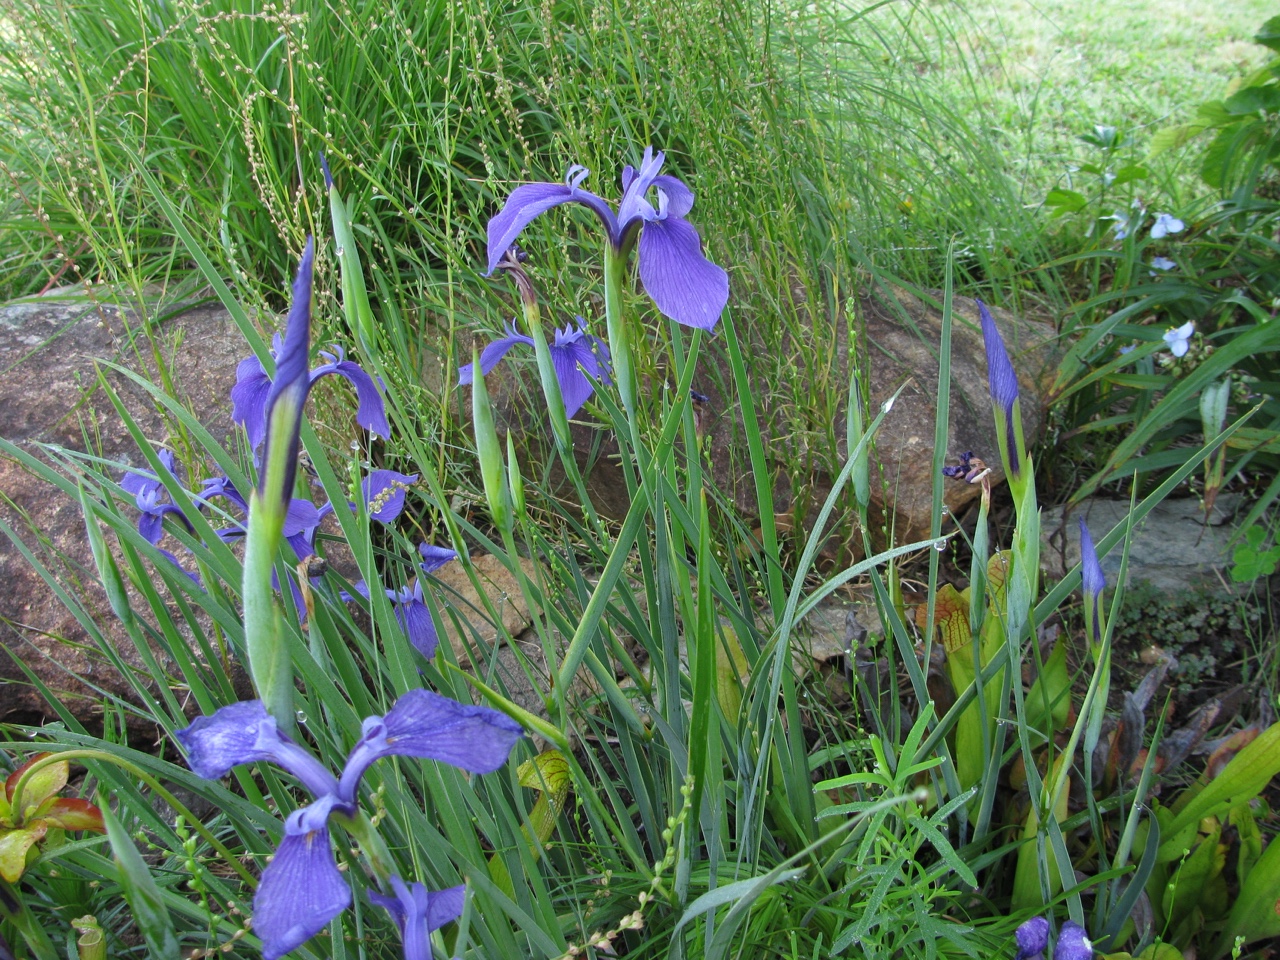 The Scientific Name is Iris tridentata. You will likely hear them called Savanna Iris. This picture shows the Bog garden in June of Iris tridentata